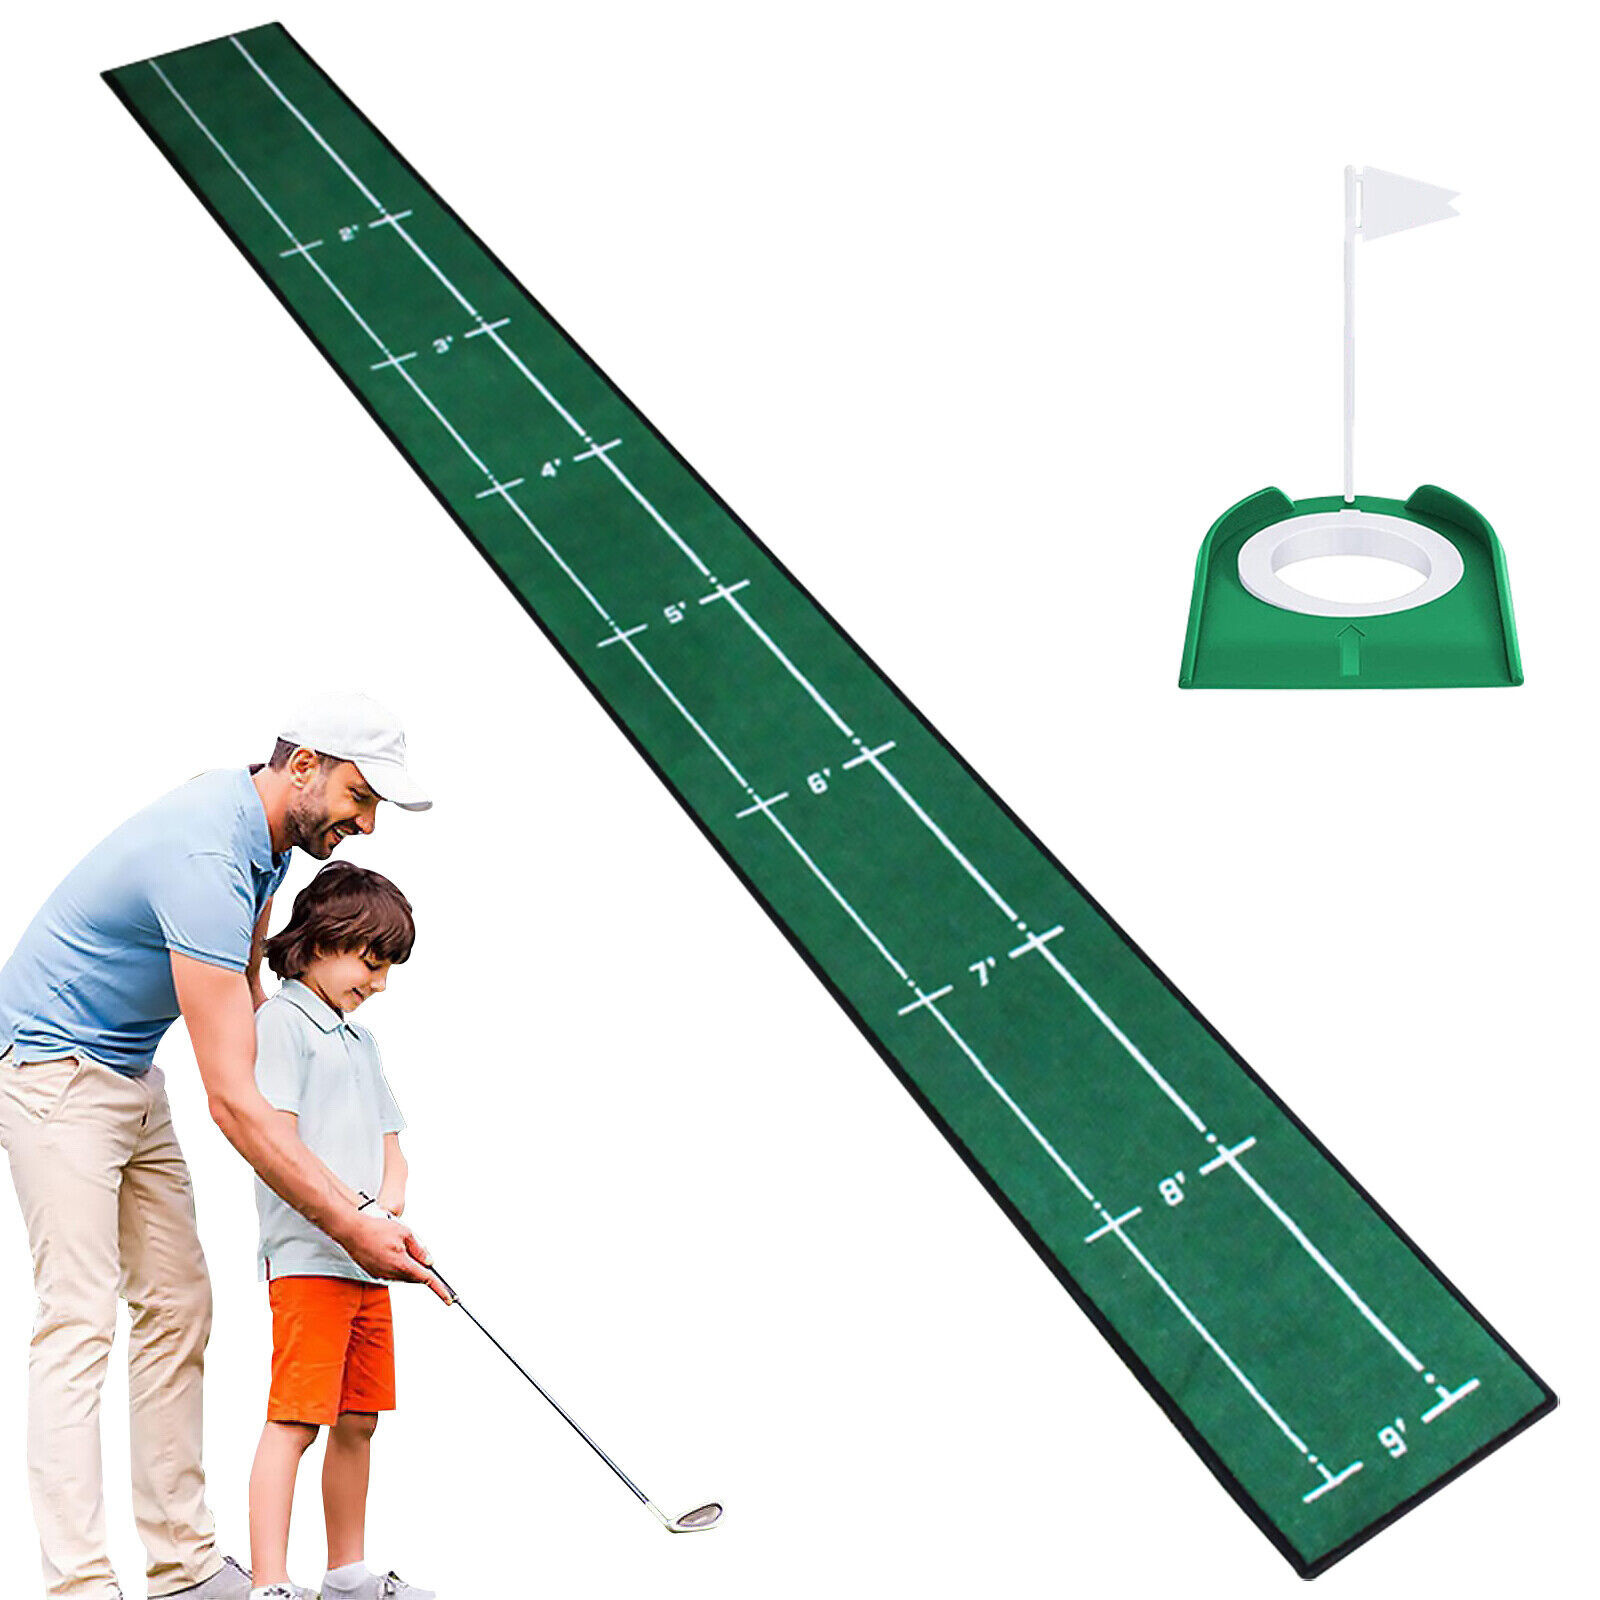 Putting Green Golf Mat with Putting Green Cup and Flag Anti-Slip Golf PuttingMat